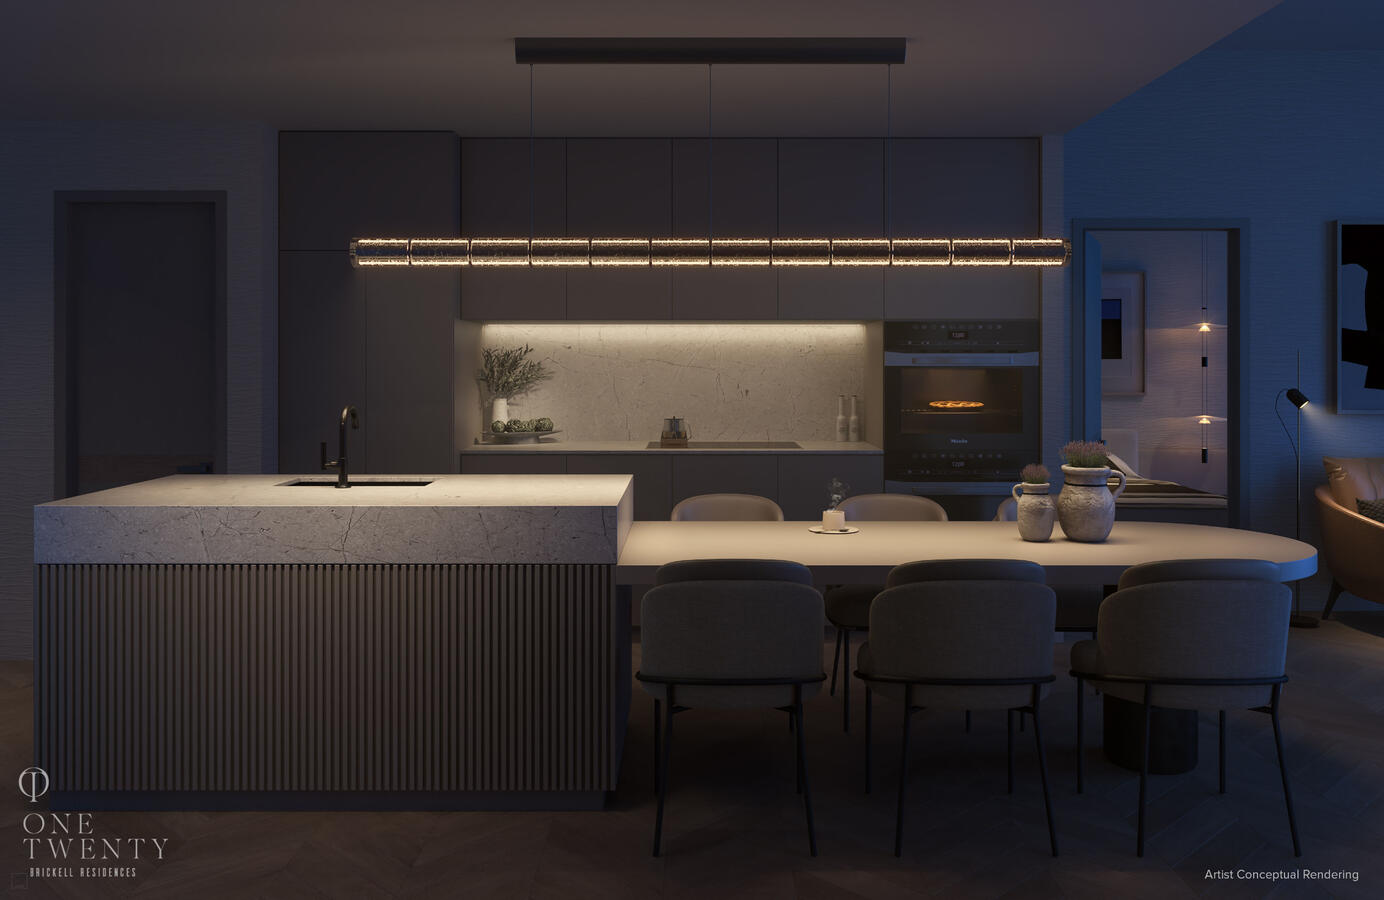 Fully-integrated Italia kitchens with custom countertops, backsplashes and a contemporary under-mount sink